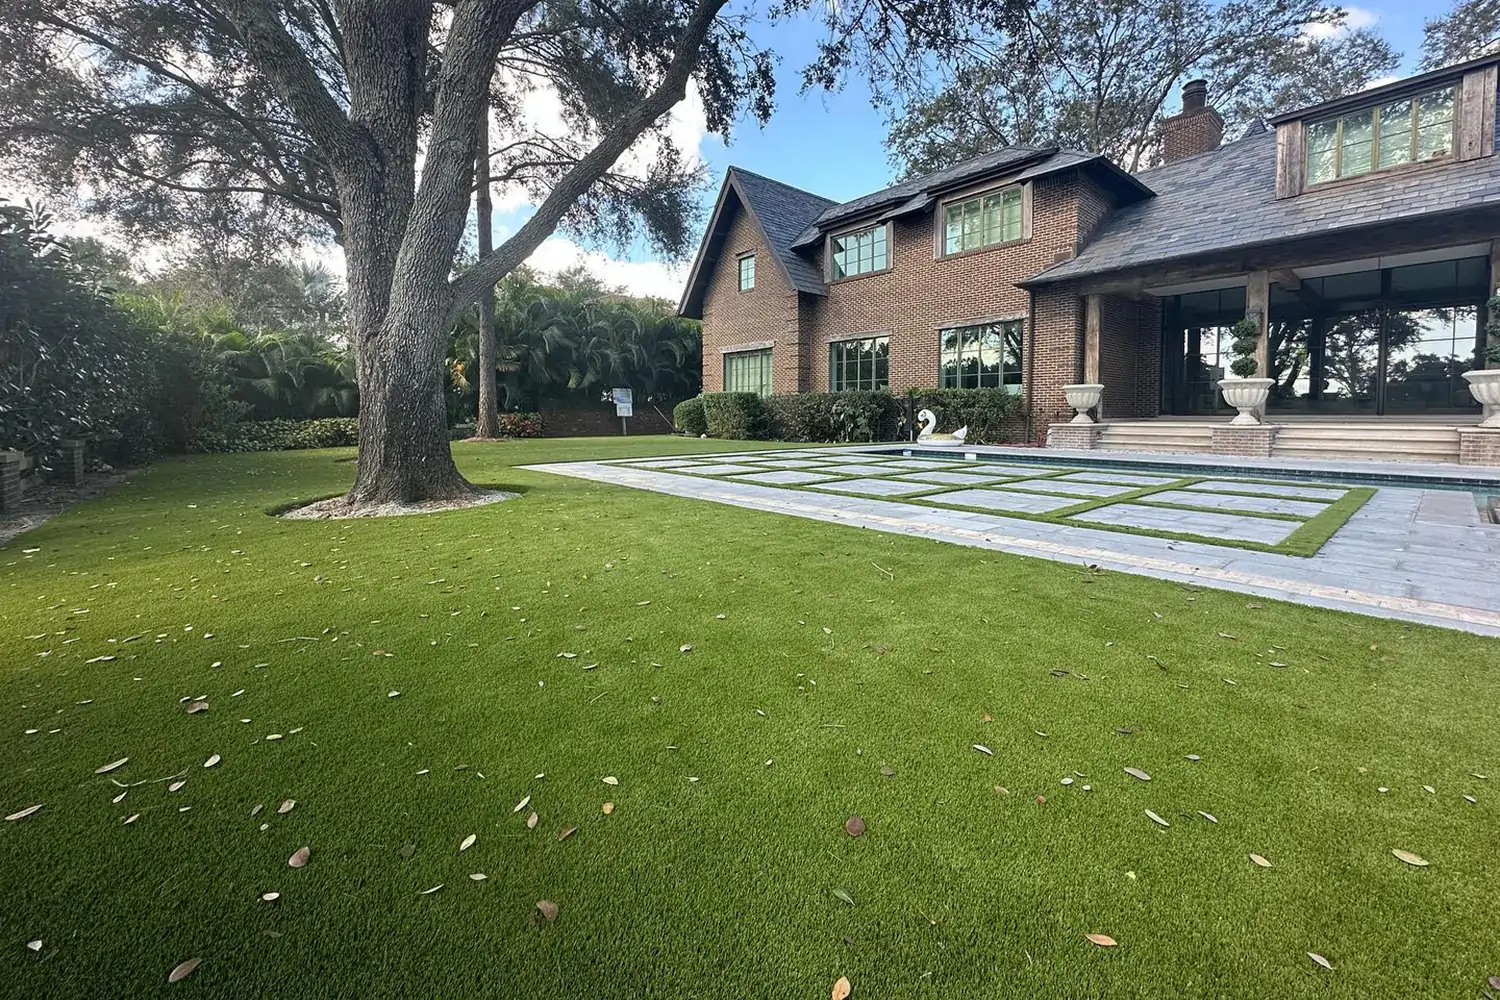 Artificial grass backyard installed by SYNLawn